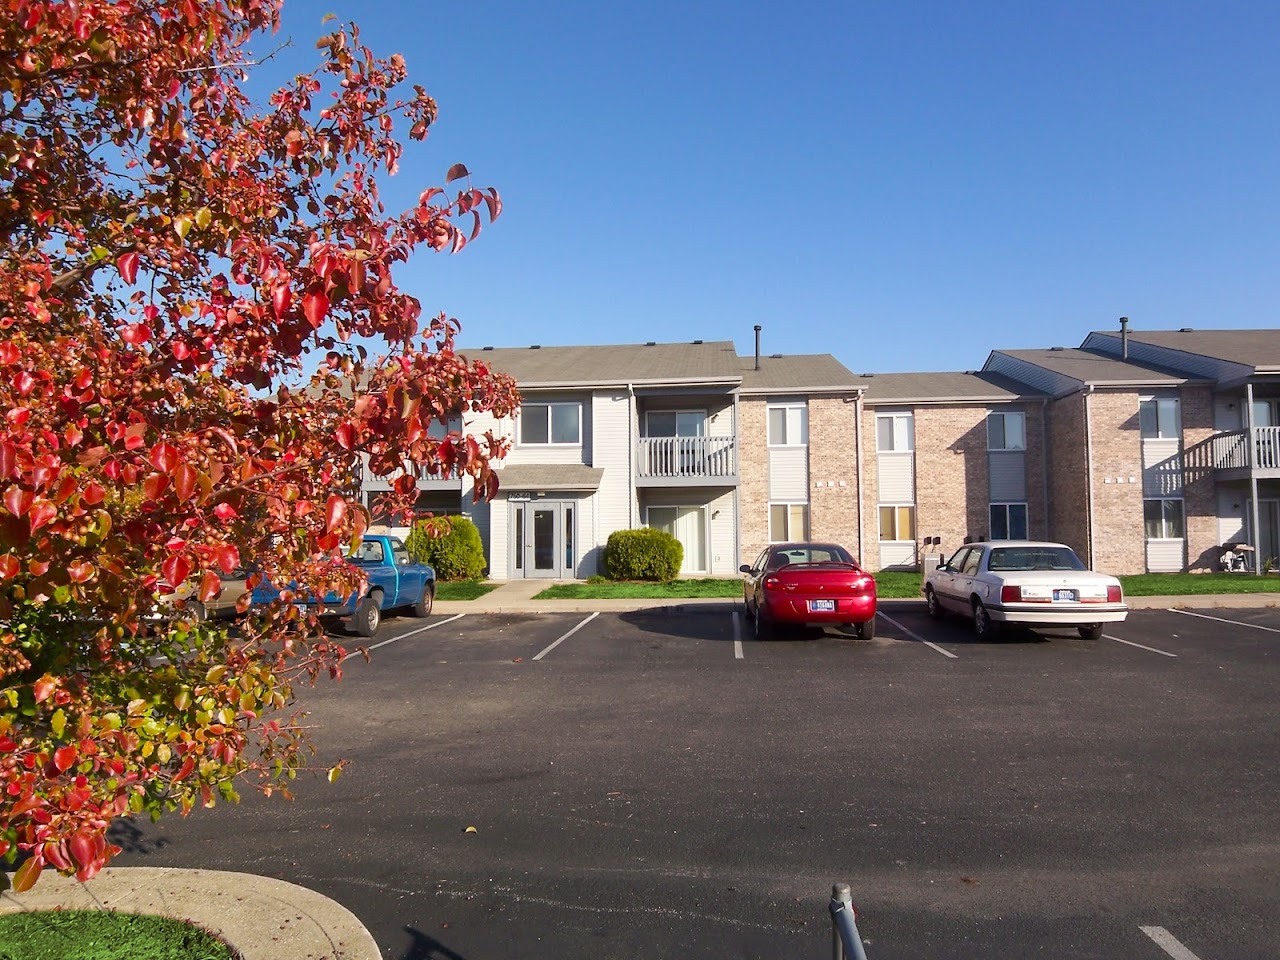 Photo of CANTERBURY HOUSE APTS (SPRINGBROOK) at 701 STONE RIDGE DR FRANKFORT, IN 46041